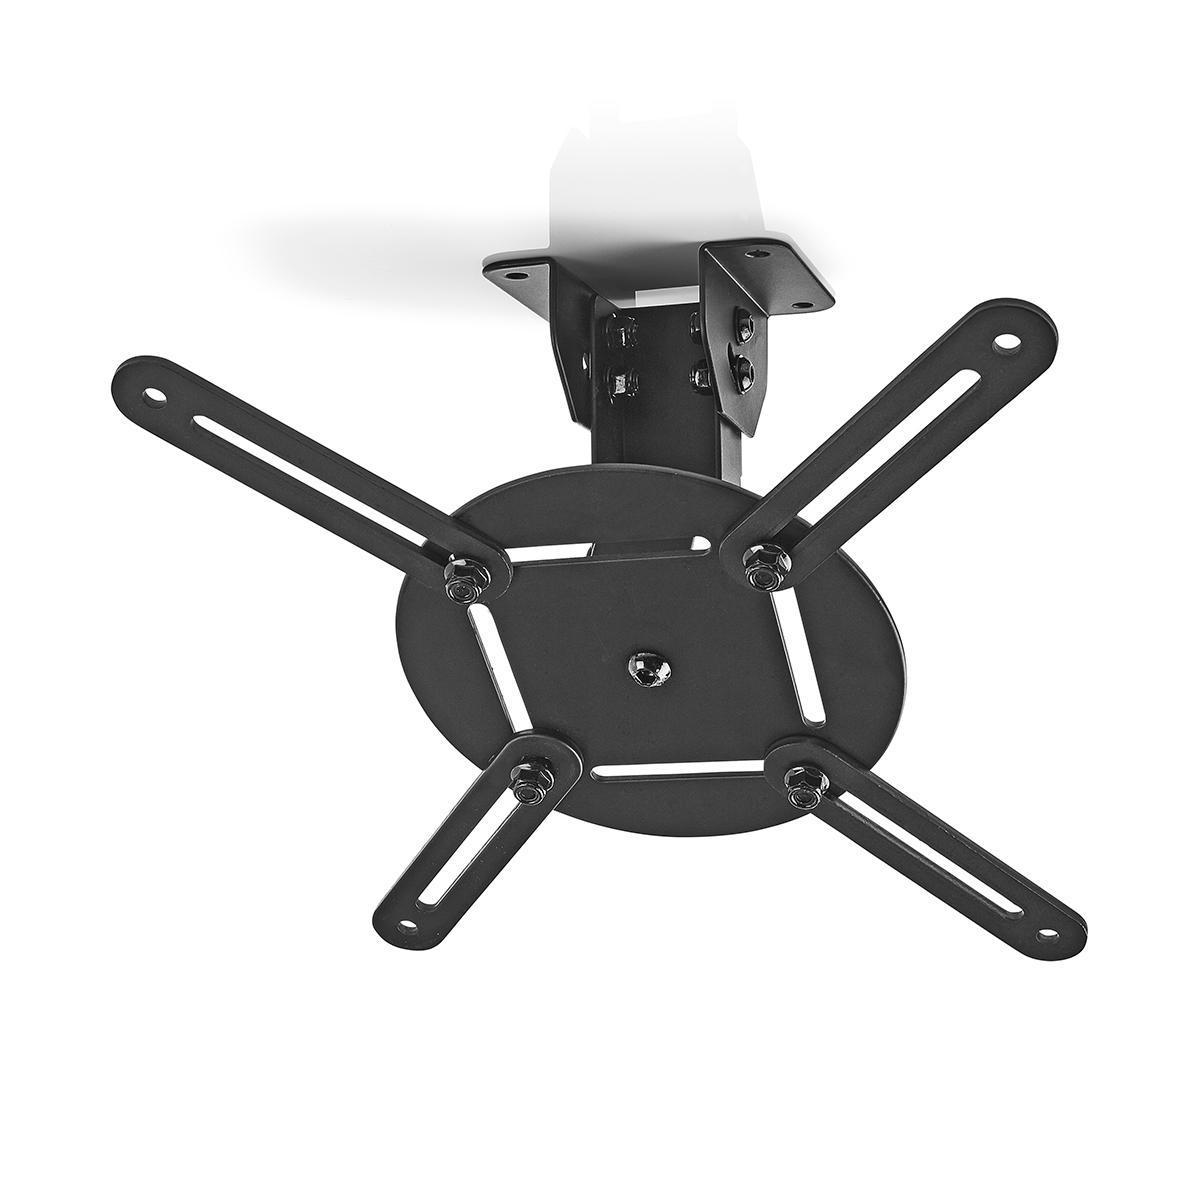 Projector Ceiling Mount 360 Rotatable Max 10 Kg 130 Mm